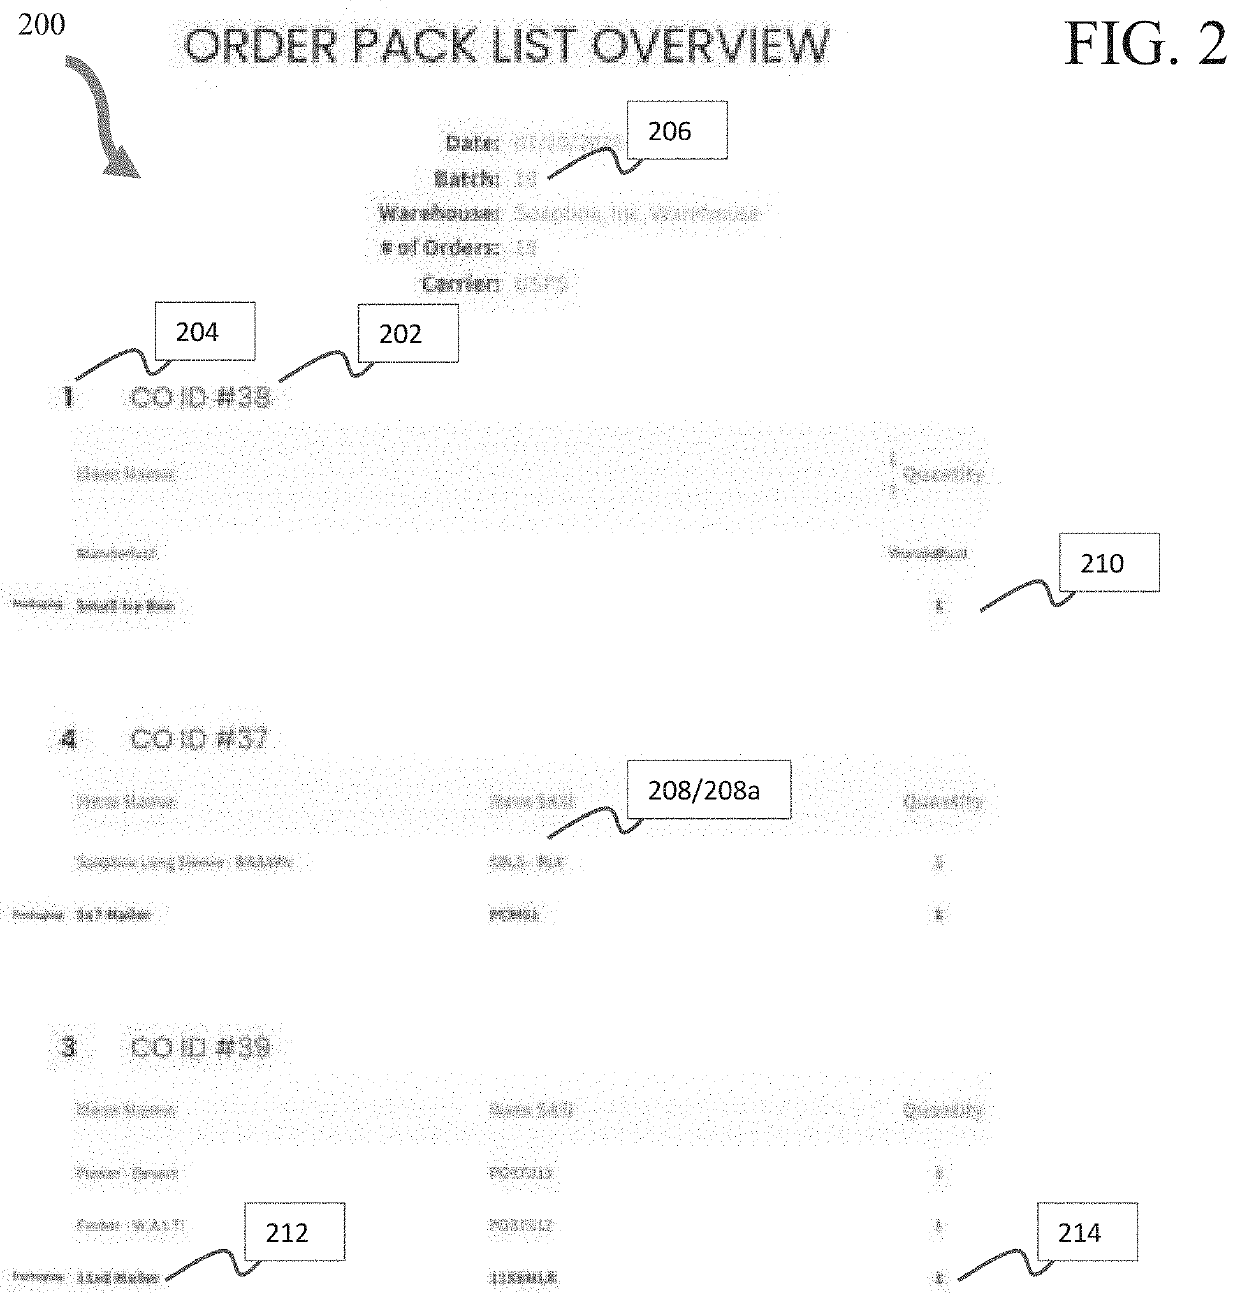 Systems and methods for order fulfillment, common order pack lists, multi-item order packing, and shipping rate automation